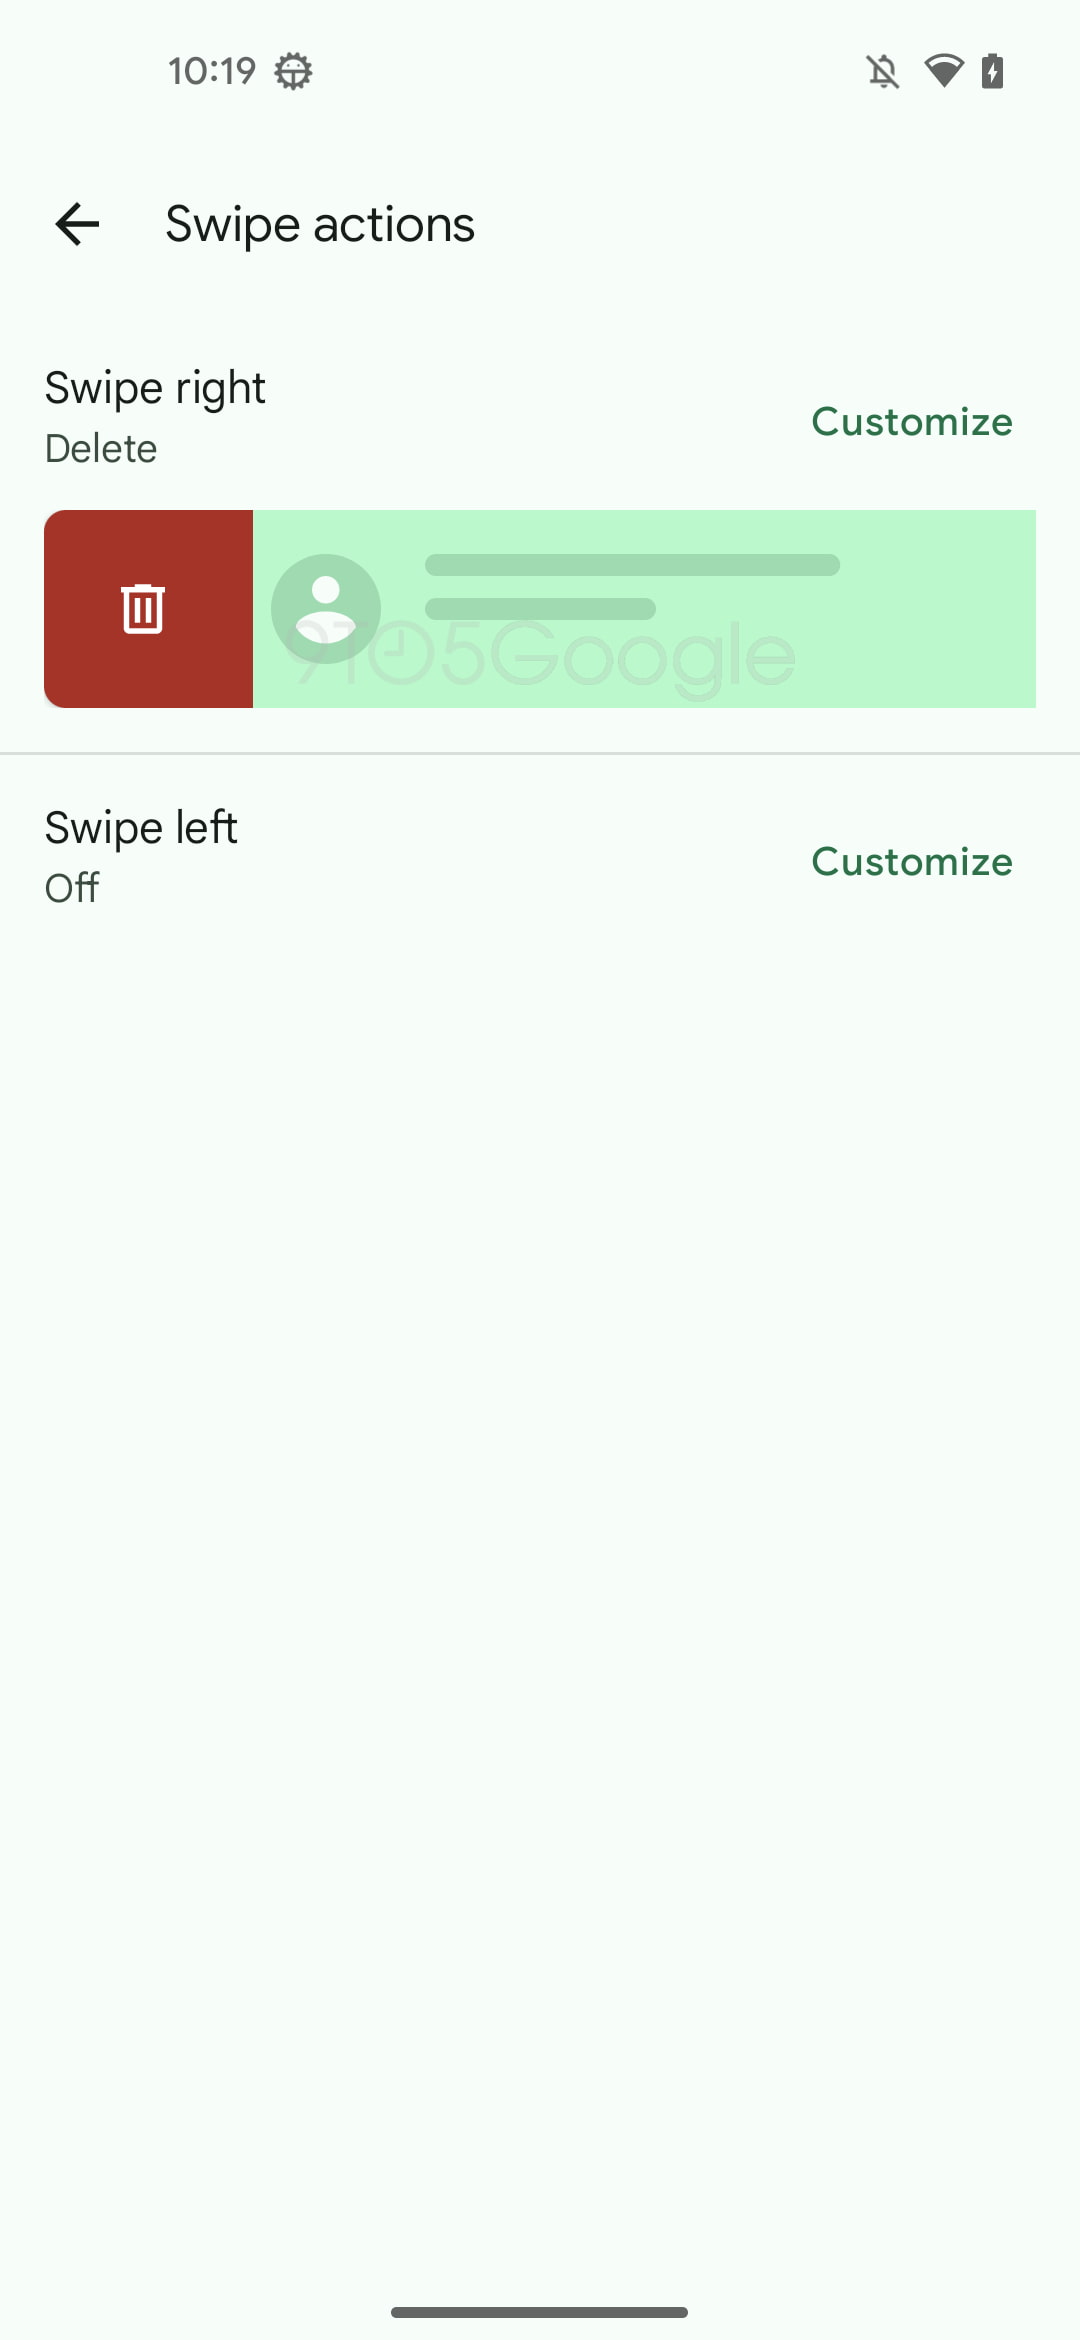 Google Messages "Swipe actions" menu with "Swipe right" set to Delete and "Swipe left" set to Off